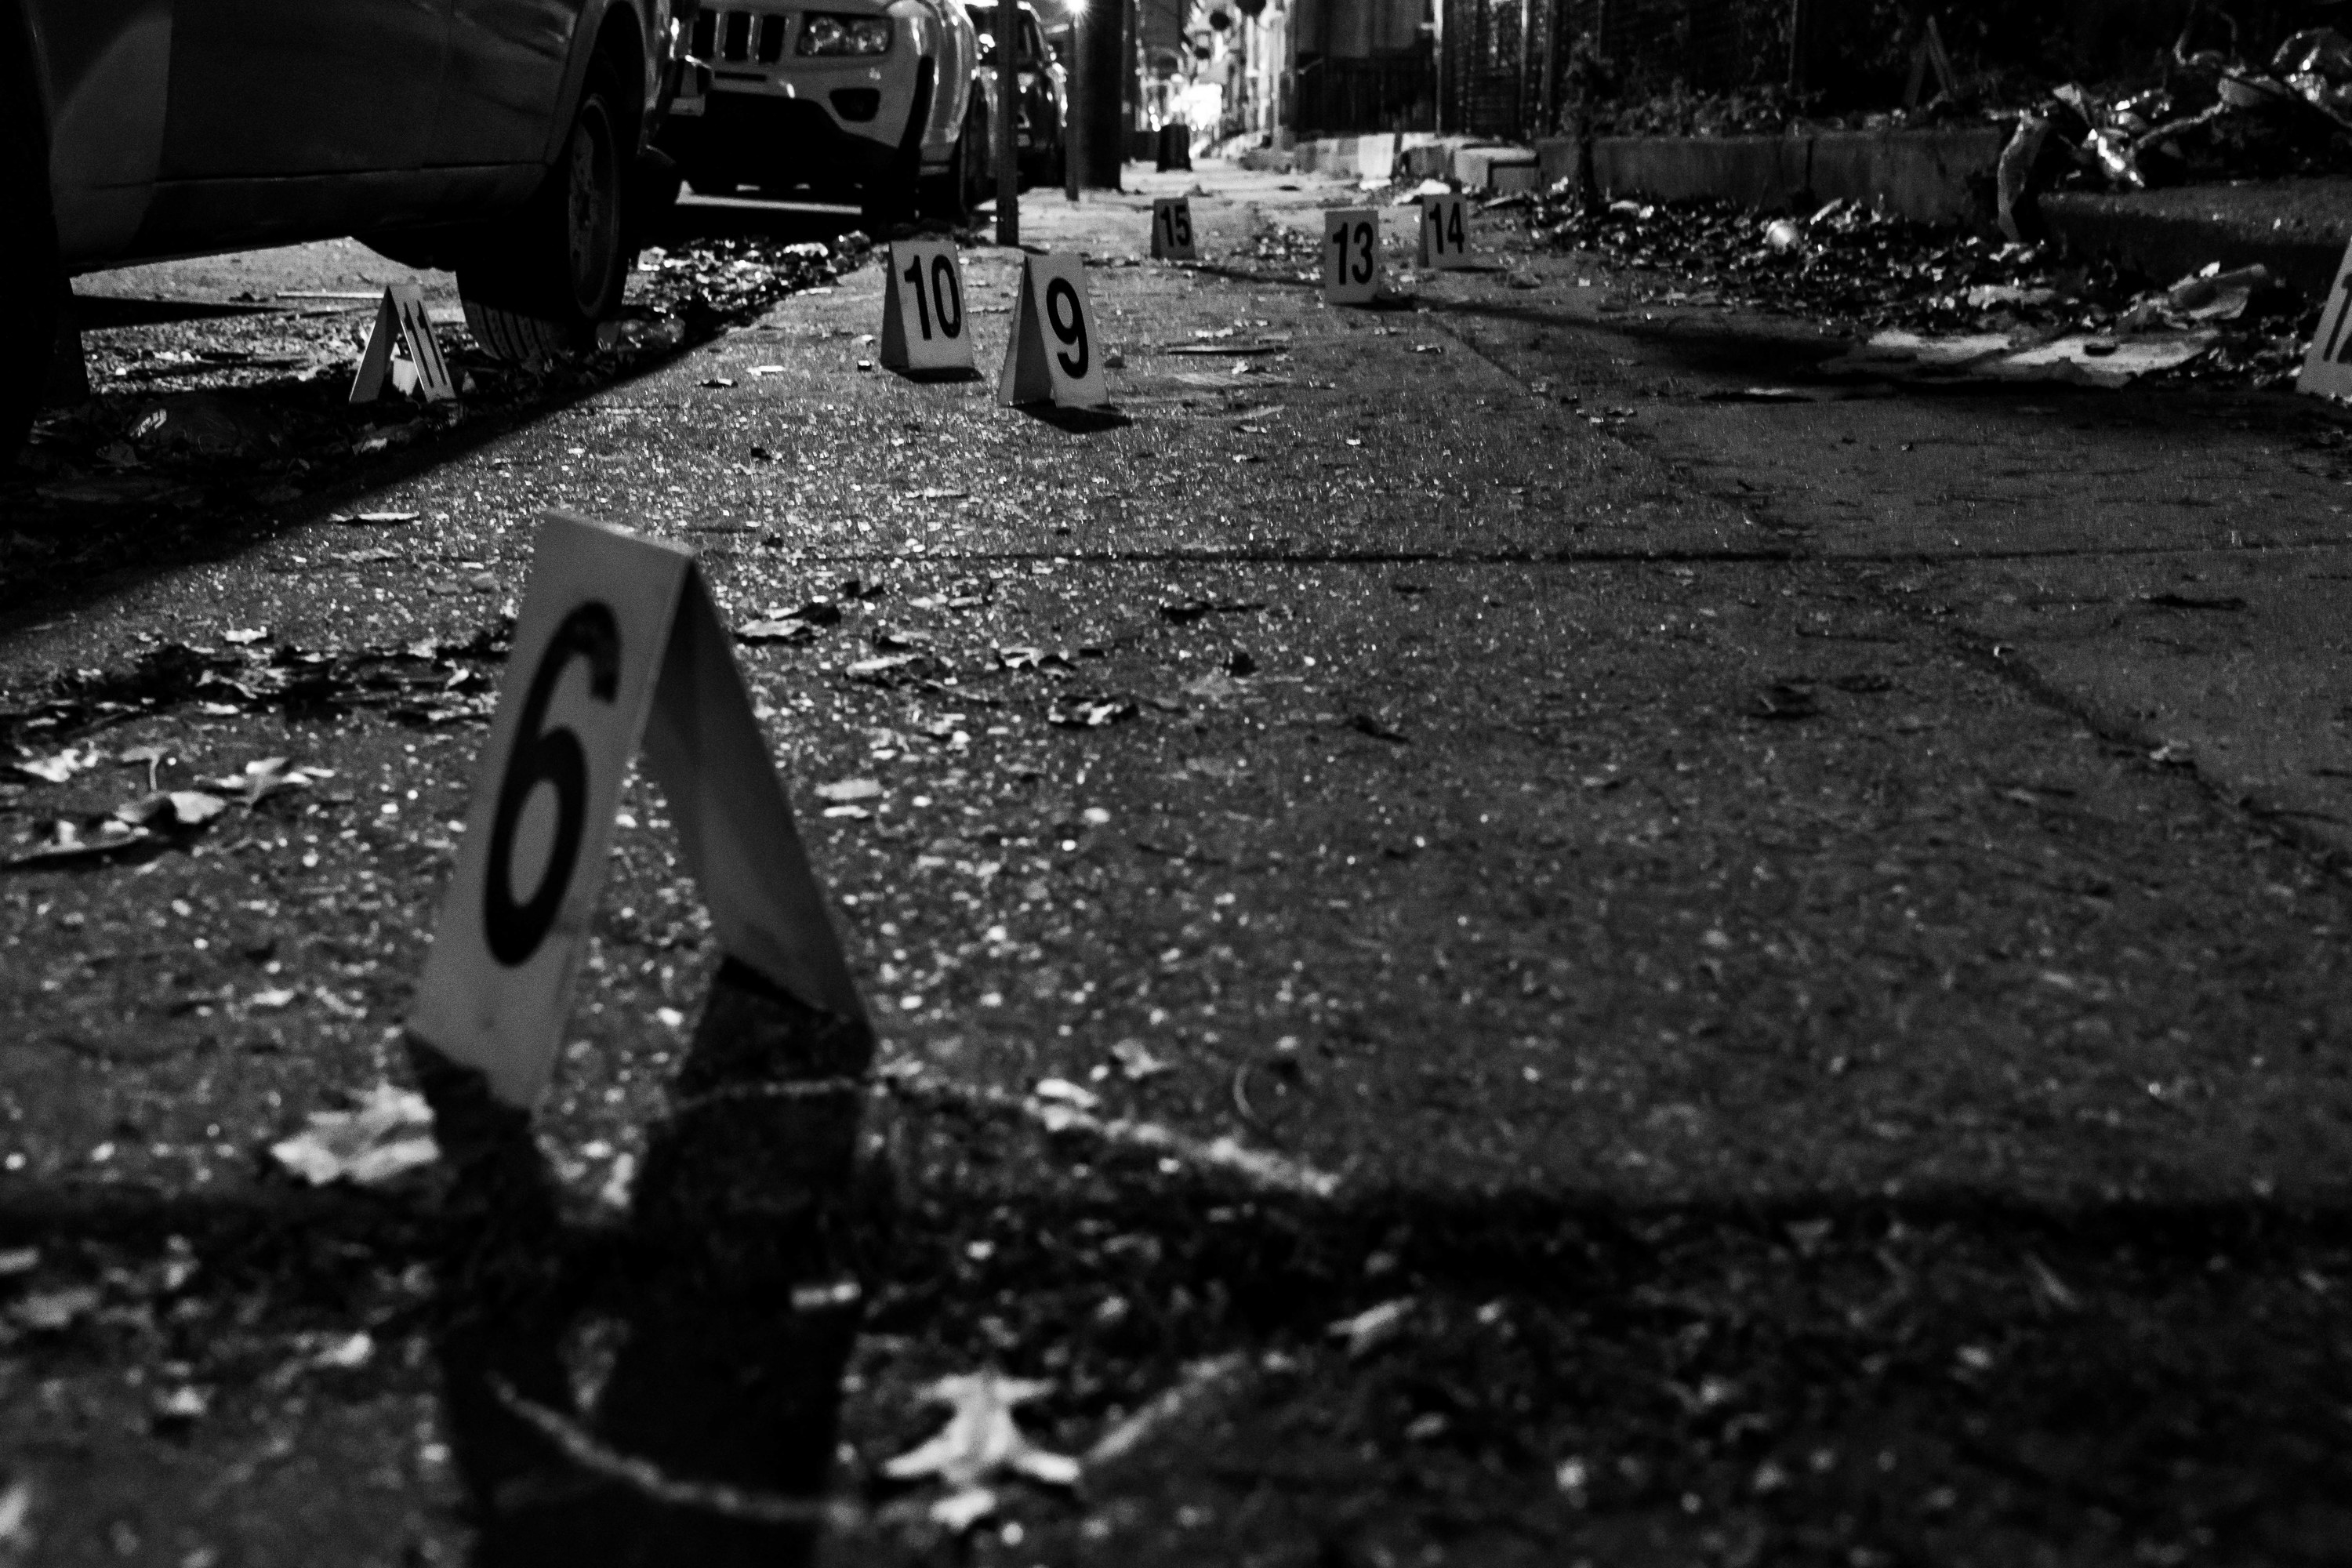 Police markers on the the ground